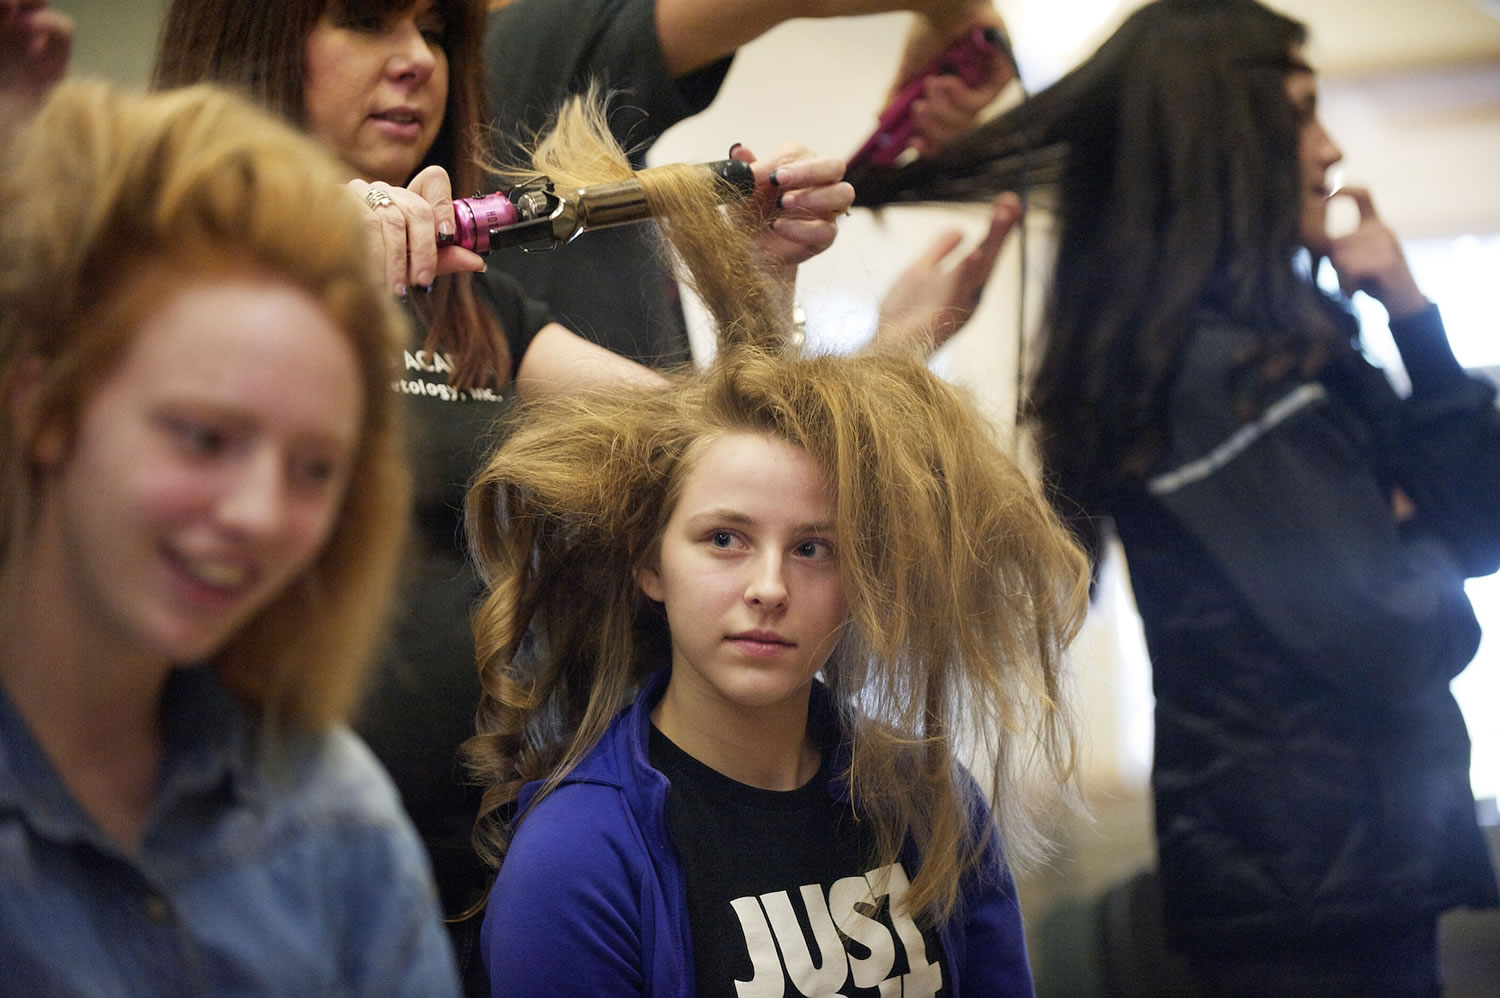 Bethany Lowery, 18, has her hair done by Val Taylor before the start of a Columbia River High School fashion show fundraiser at Thomas Jefferson Middle School, Sunday, February 10, 2013.